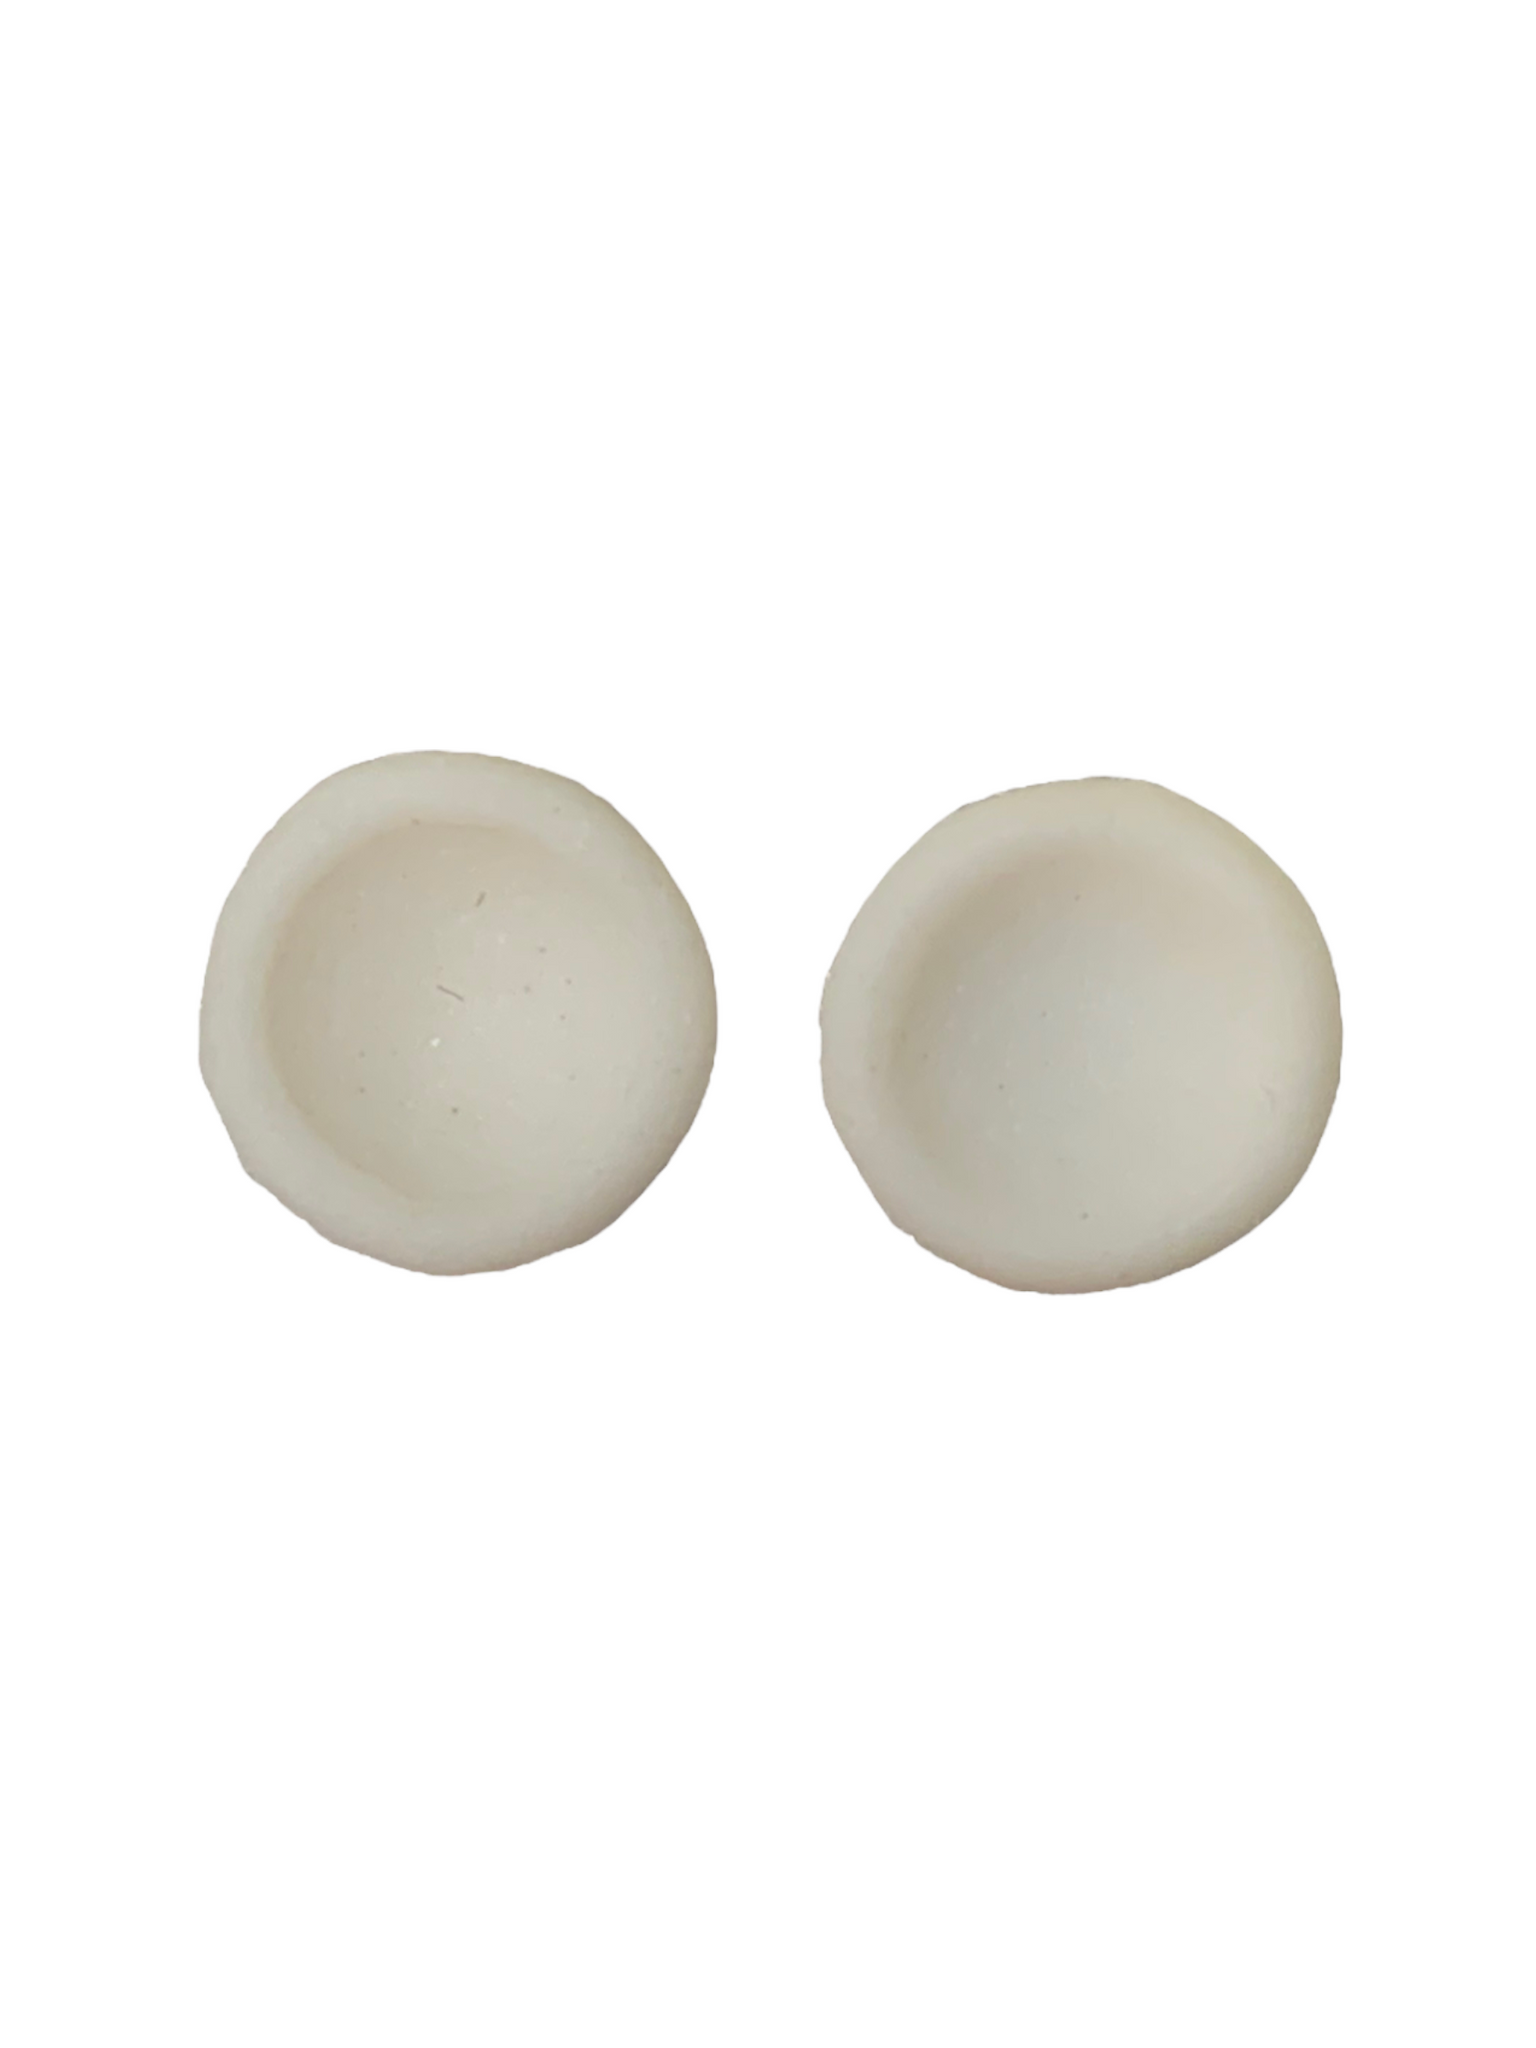 Extra Small Porcelain Post Earrings